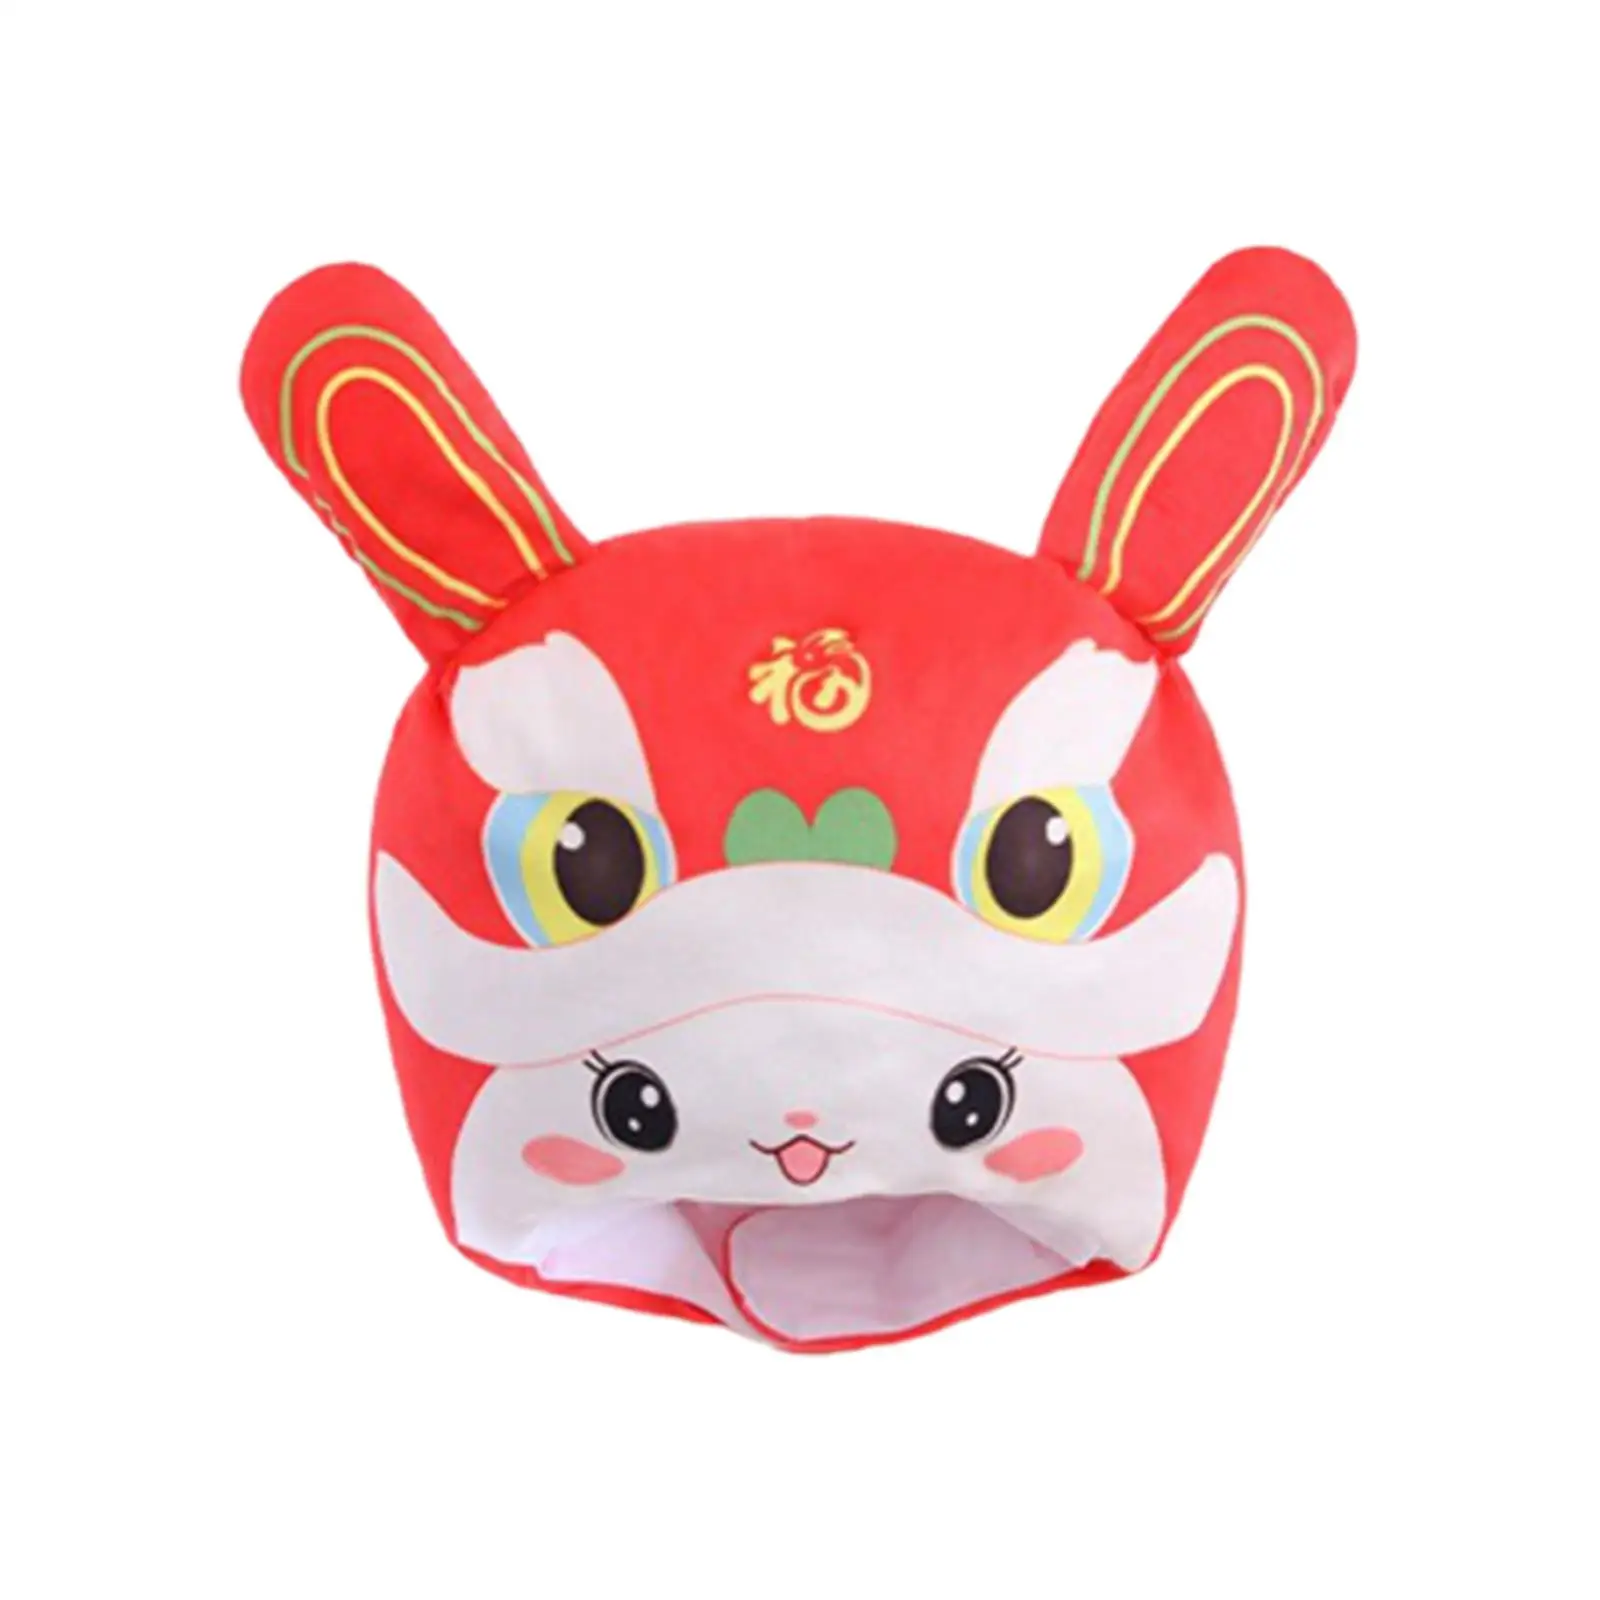 Funny Lion Rabbit Plush Hat Unisex Novelty Animal Hat Headwear Holiday Decorations Comfortable Warm for Dress Cosplay New Year